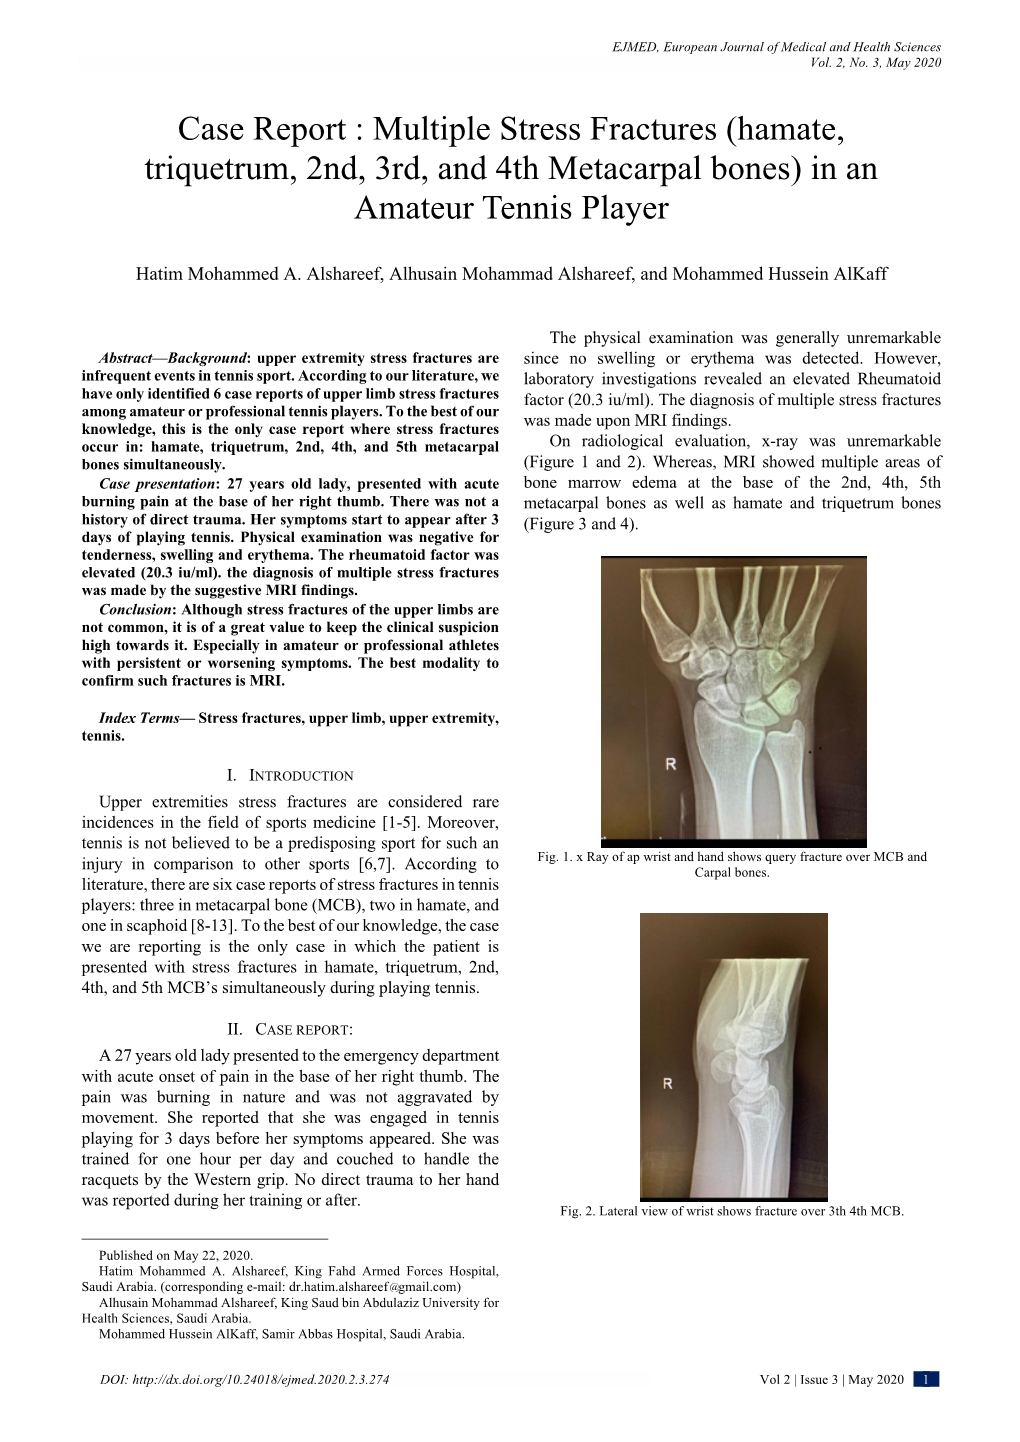 Case Report : Multiple Stress Fractures (Hamate, Triquetrum, 2Nd, 3Rd, and 4Th Metacarpal Bones) in an Amateur Tennis Player